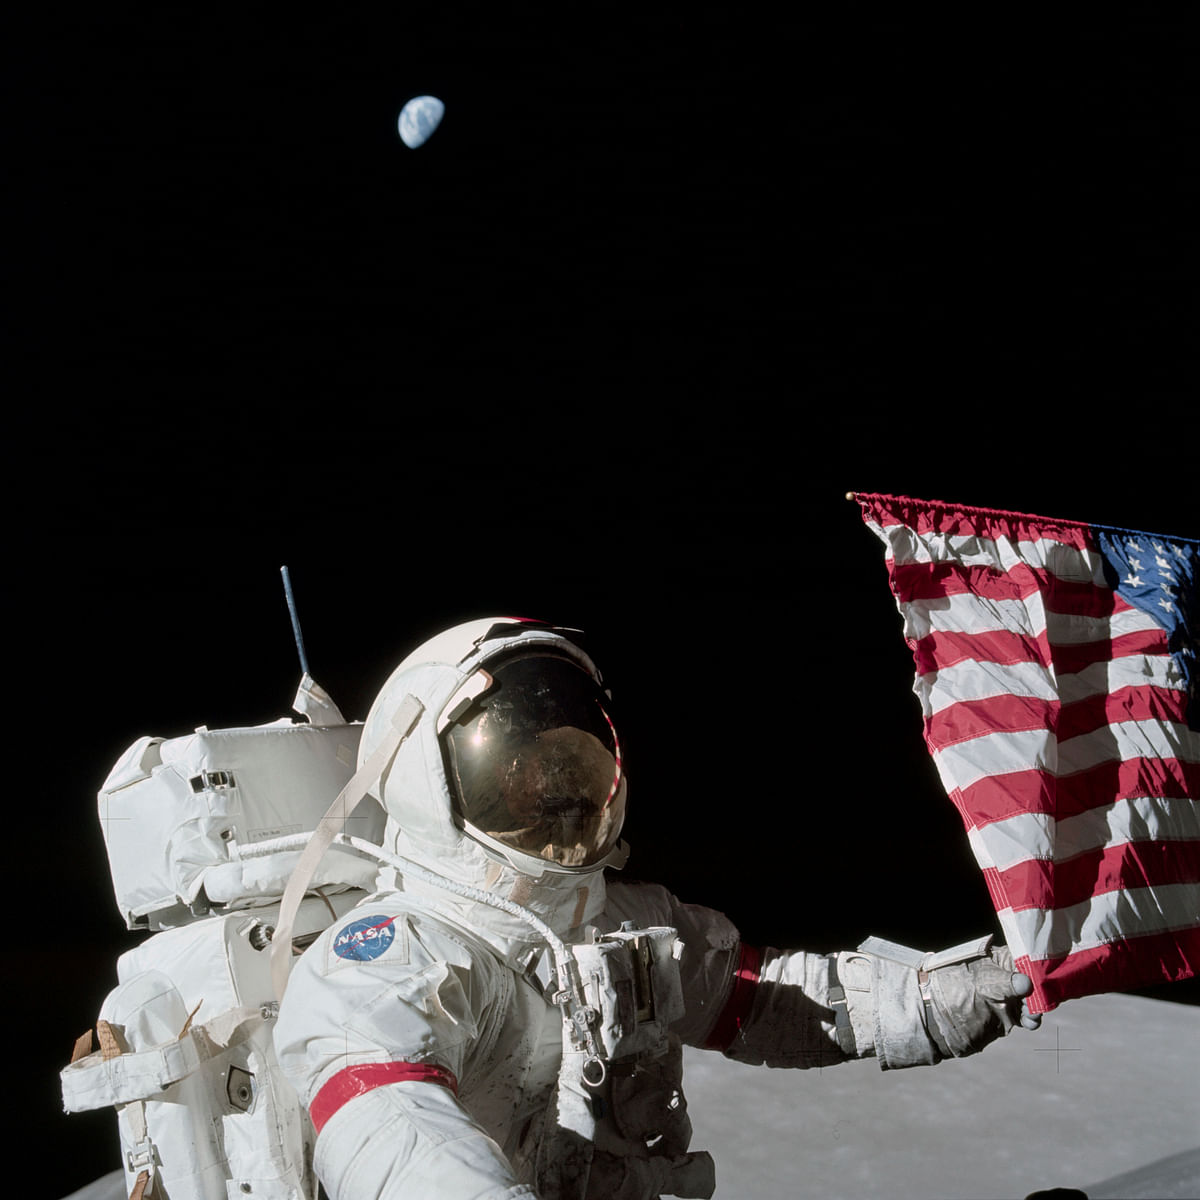 Cernan was one of the only 10 men to have stepped on the surface of the moon.